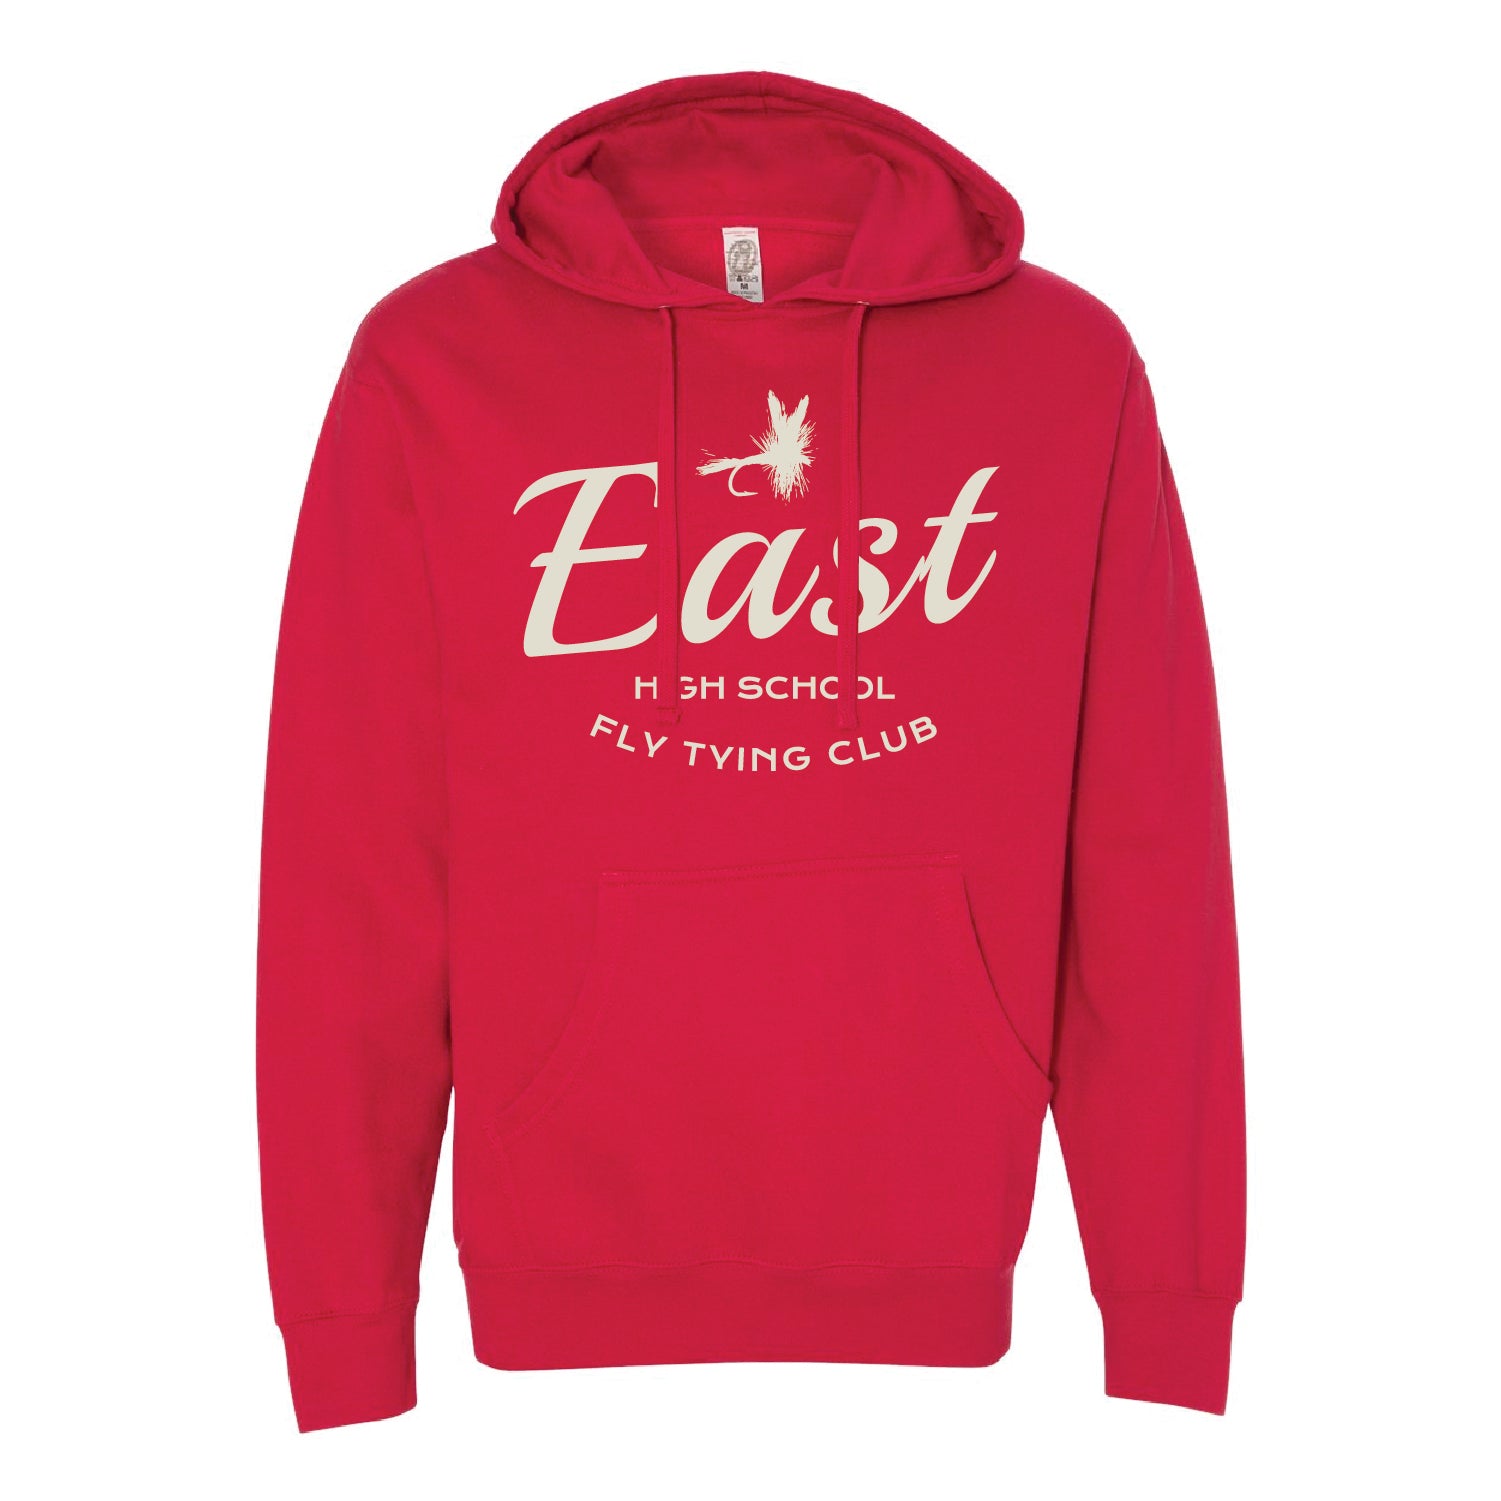 Duluth East Fly-tying Club Unisex Midweight Hooded Sweatshirt - DSP On Demand